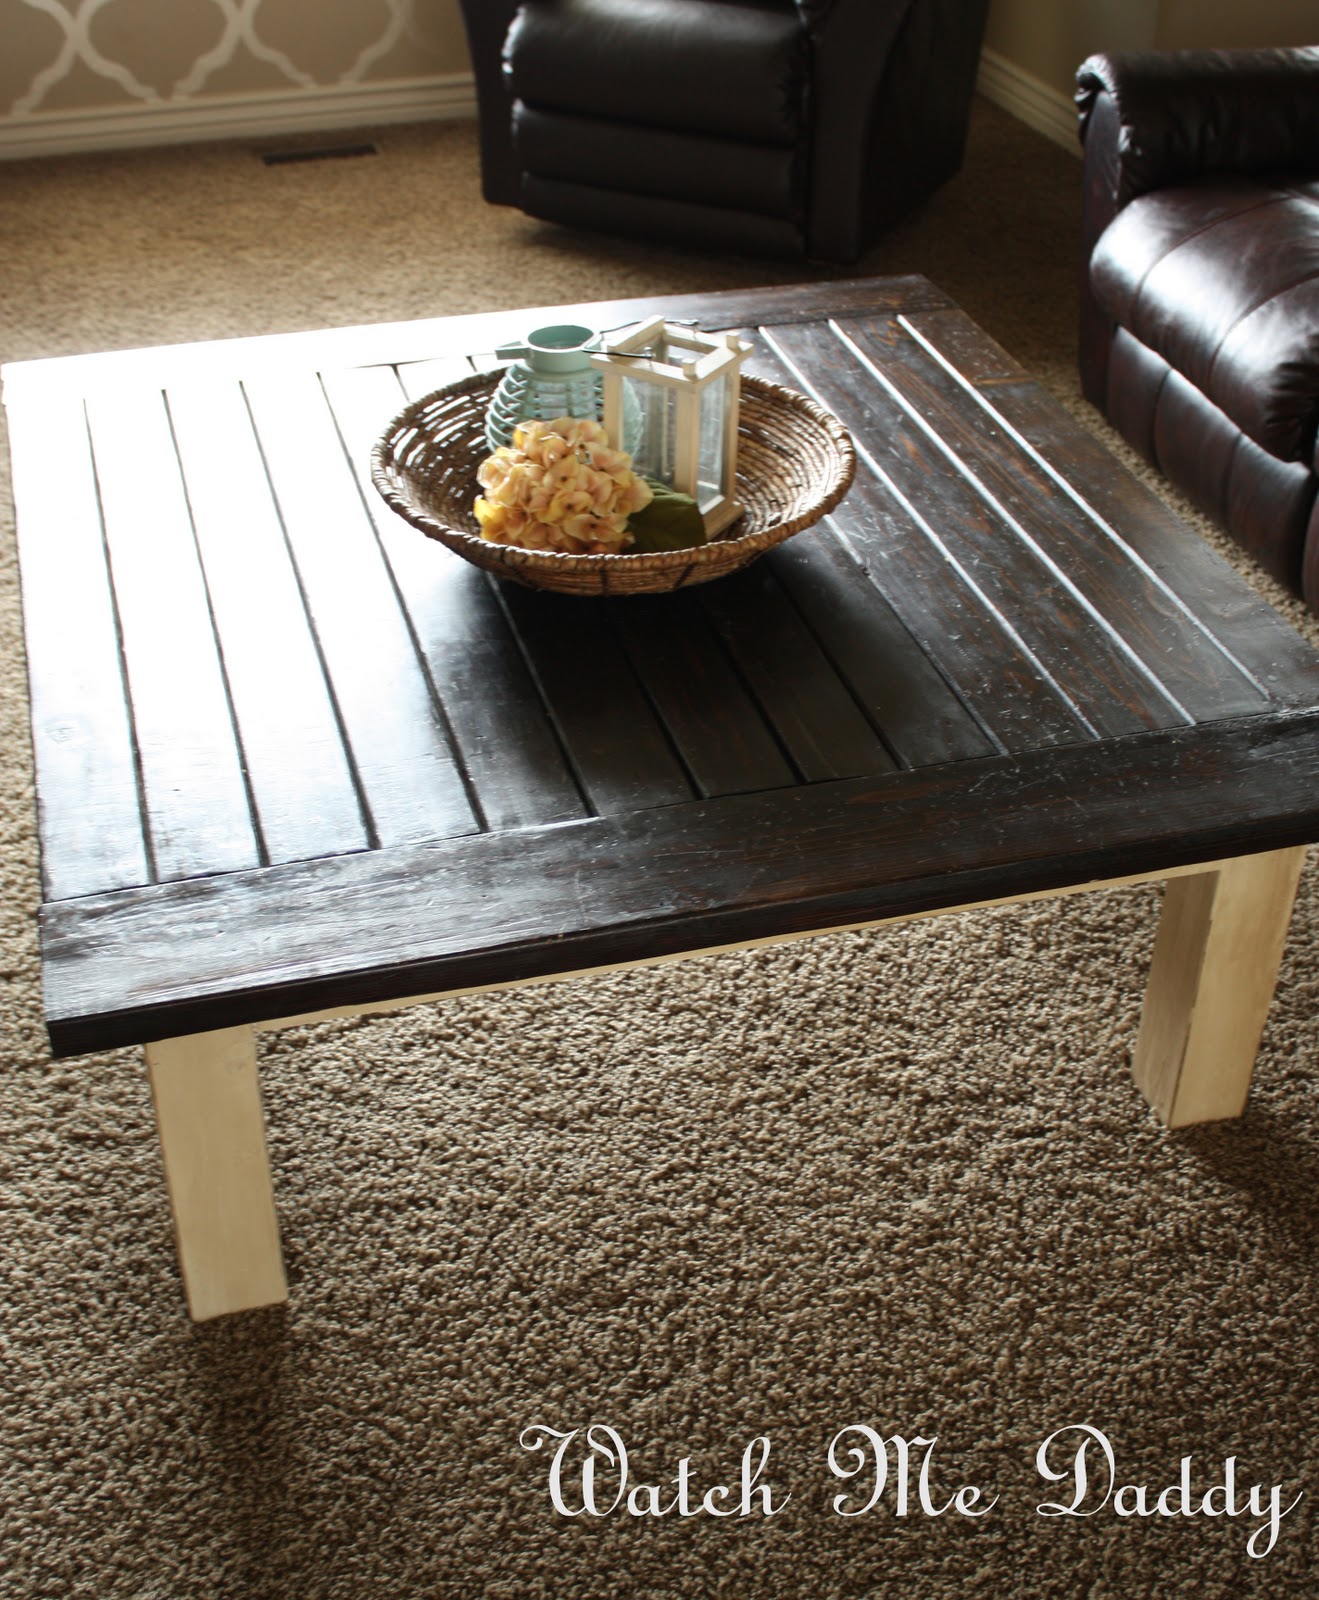 coffee tables plans